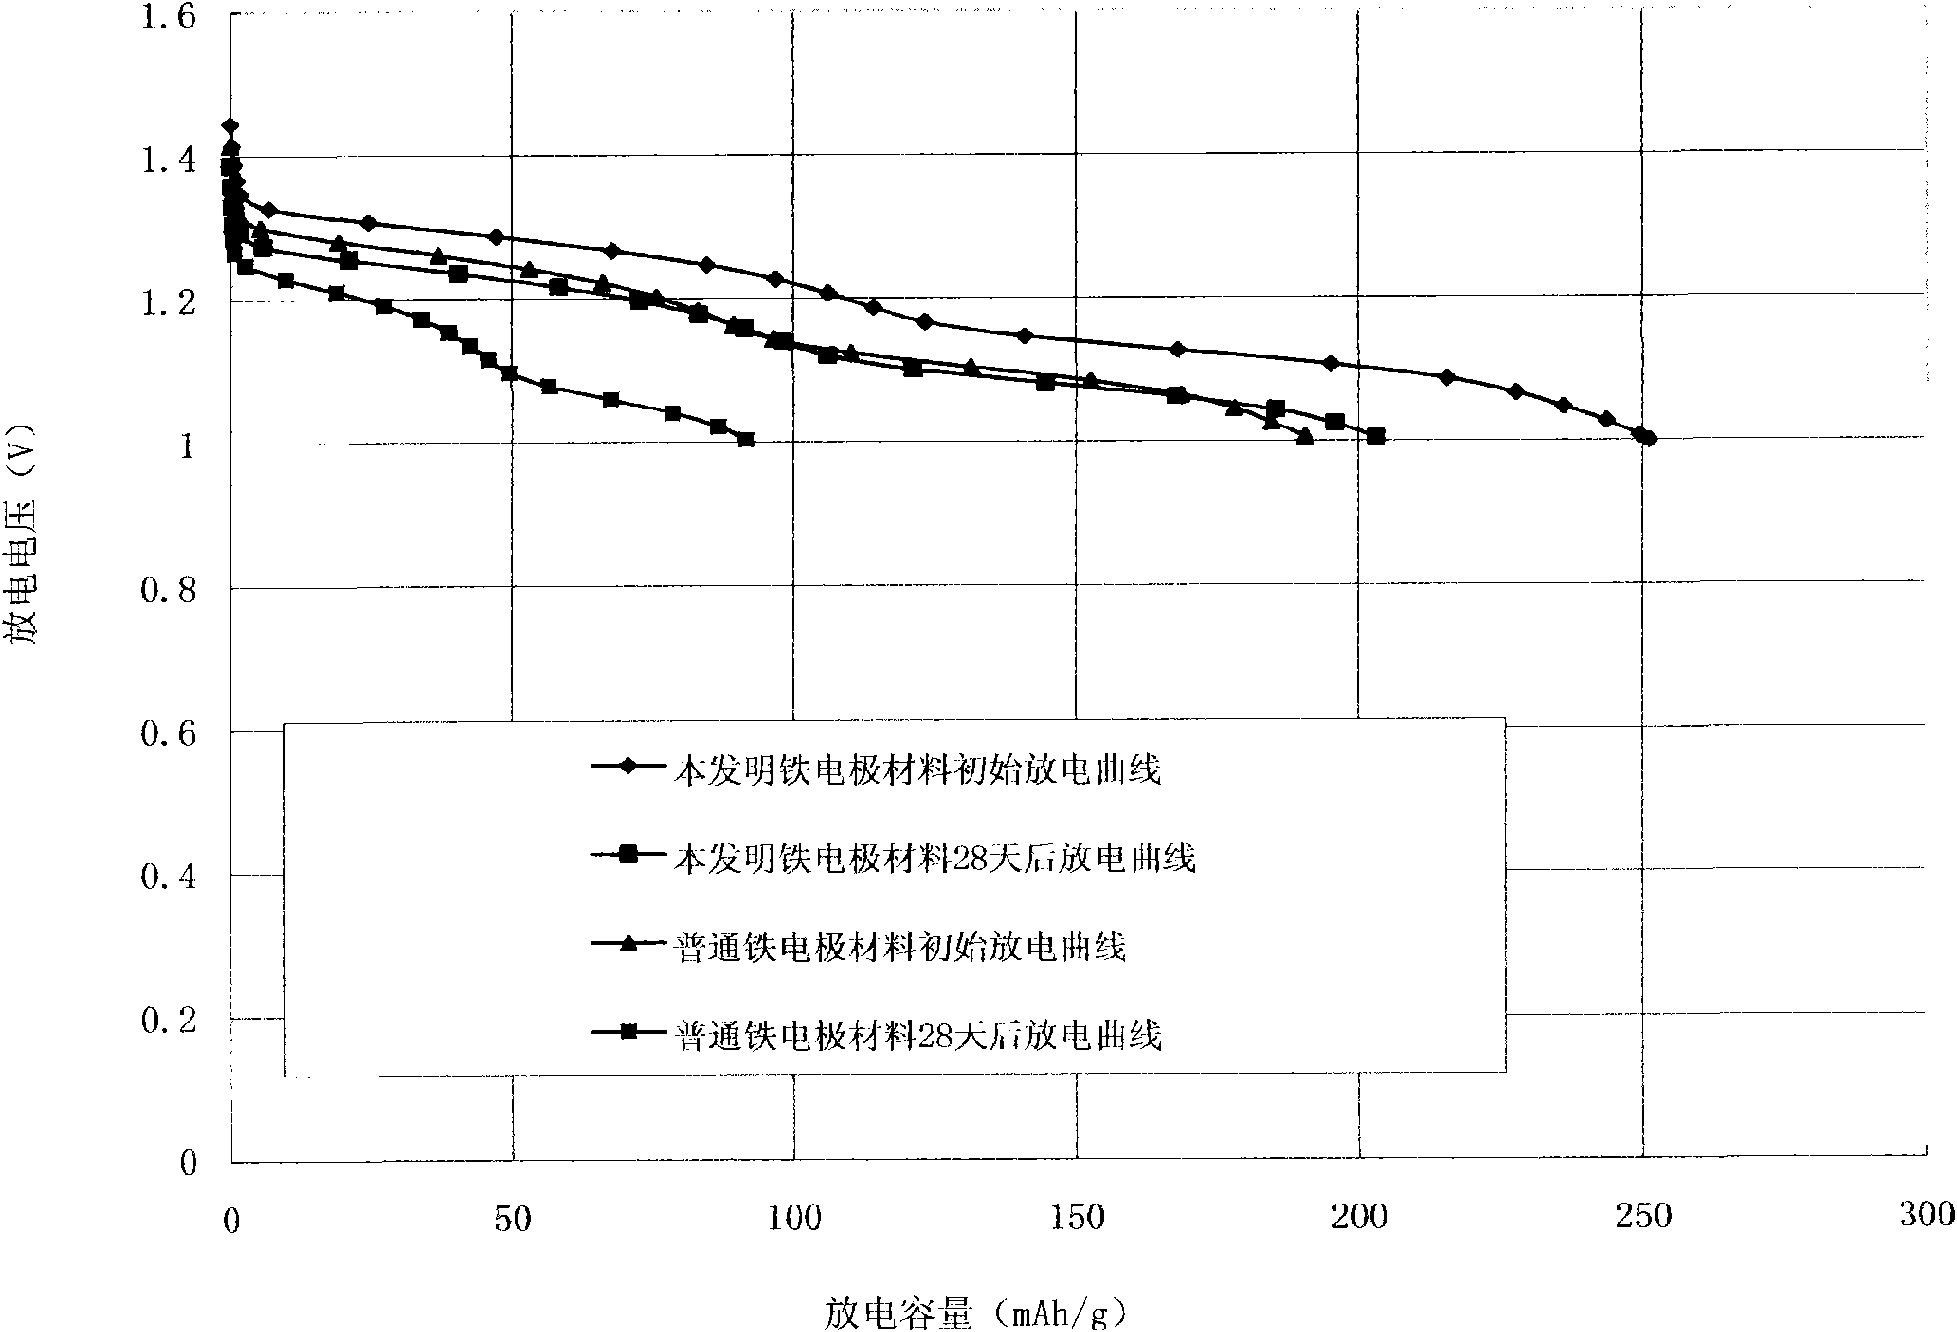 Low self-discharge ferrous electrode material